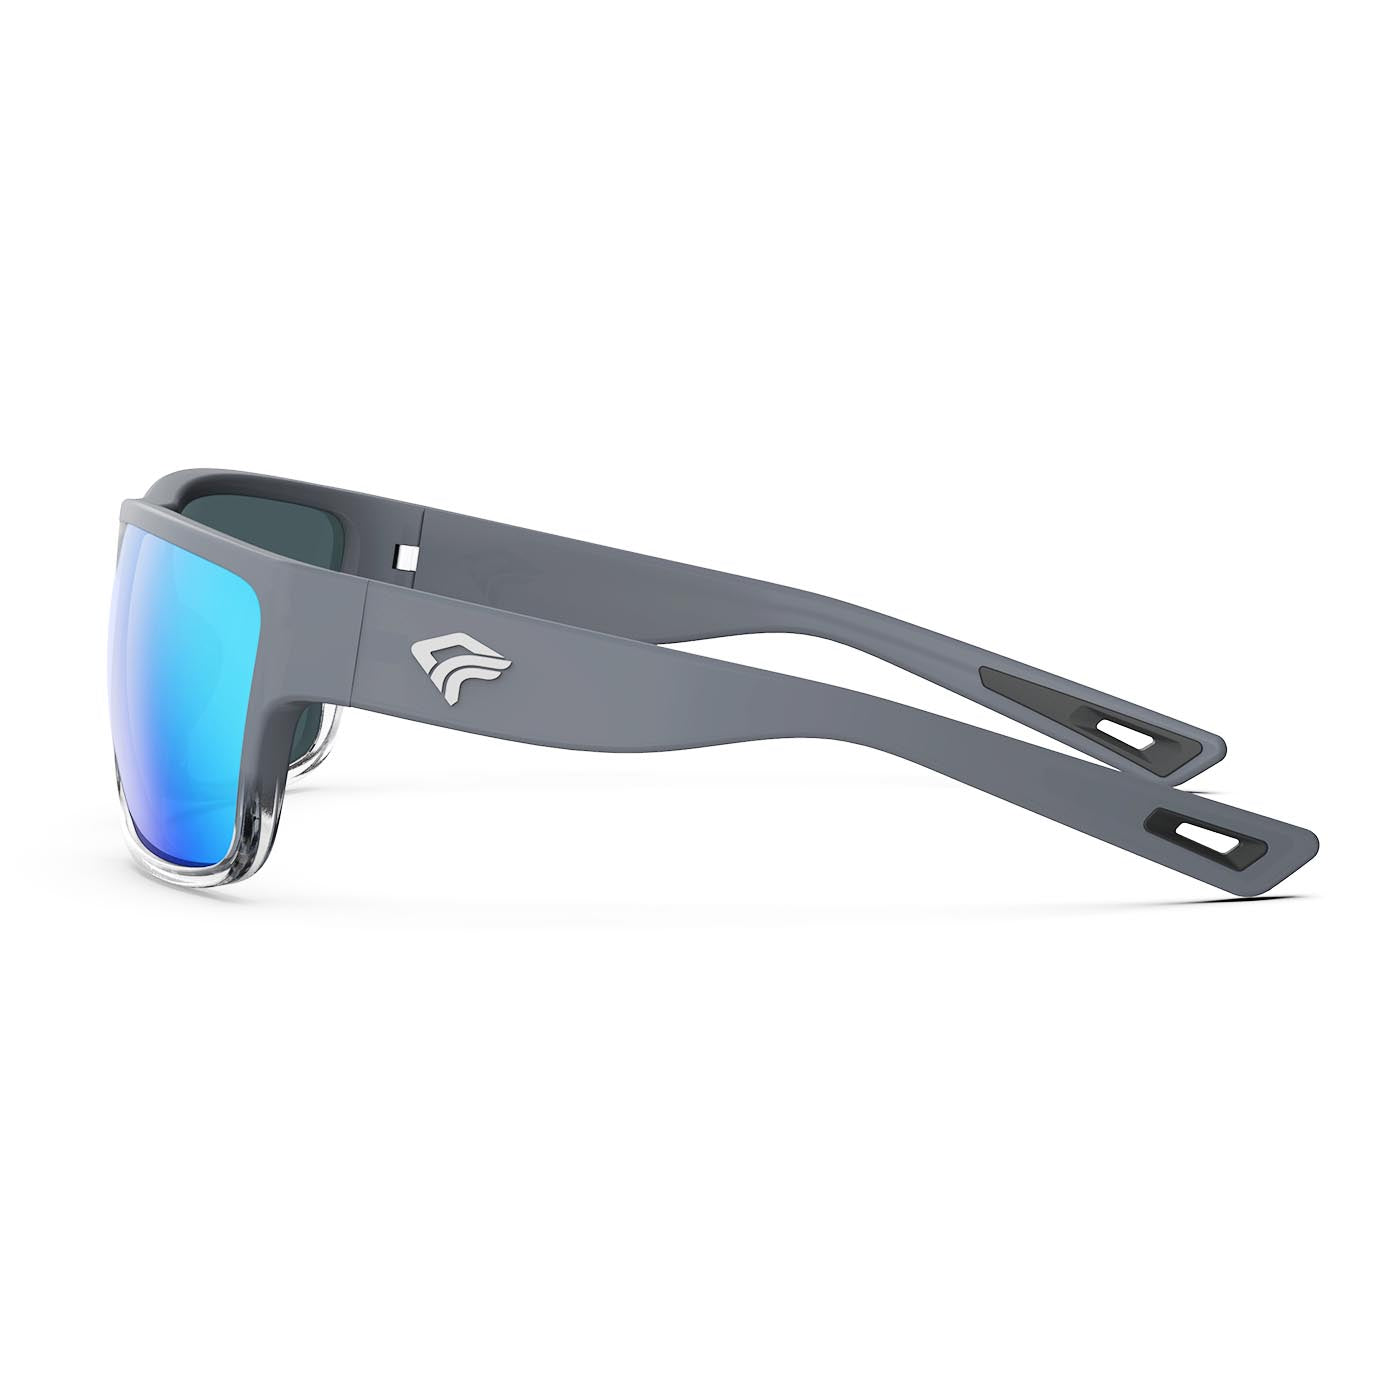 Pure Polarized Sports Sunglasses with Lifetime Warranty - Adjustable and  Flexible Frame - Ideal for Men and Women - Ideal for Cycling, Running,  Golf, and Fishing - Matte Grey To Half Transparent